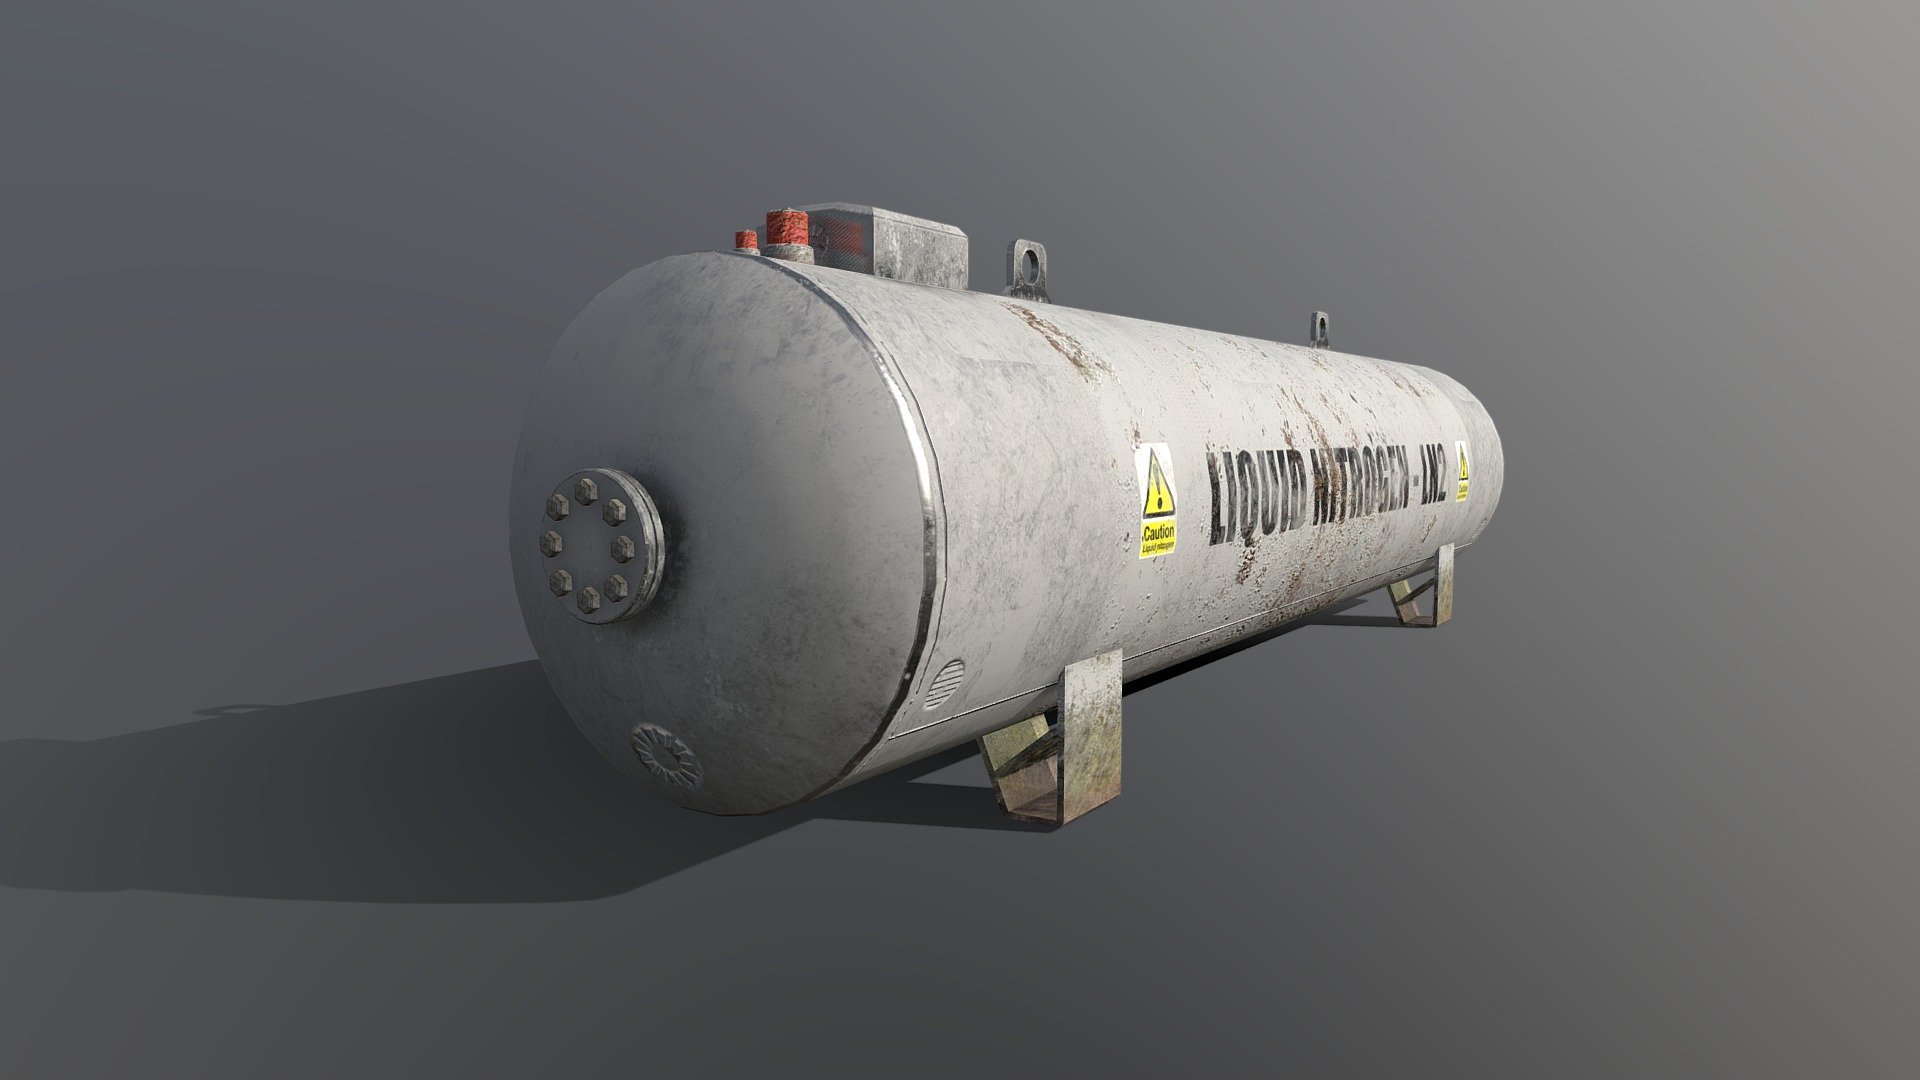 Liquid Nitrogen Industrial Storage Tank

Created in Blender 2.79/2.80

Textured in Substance Painter 2

2K Resolution

BaseColor, Metallic, Roughness, Normal Maps + Height Map if you wish to use that also

Low Poly Model

Tested in 2.80 with the EEVEE Render engine

Nice Asset for your project

Detailed Model

Easily duplicate this Model for a rack of tanks to fill out your scene

Please note if you are using EEVEE:

You may need to go into the Render Properties Tab - Performance - Enable High Quality Normals

Approximate Real World Scale Applied

3 Formats provided:  .blend , Fbx , Obj  + All Textures

Thanks for your interest &amp; support!

MagicCGIStudios - Liquid Nitrogen Industrial Storage Tank - Buy Royalty Free 3D model by MagicCGIStudios 3d model